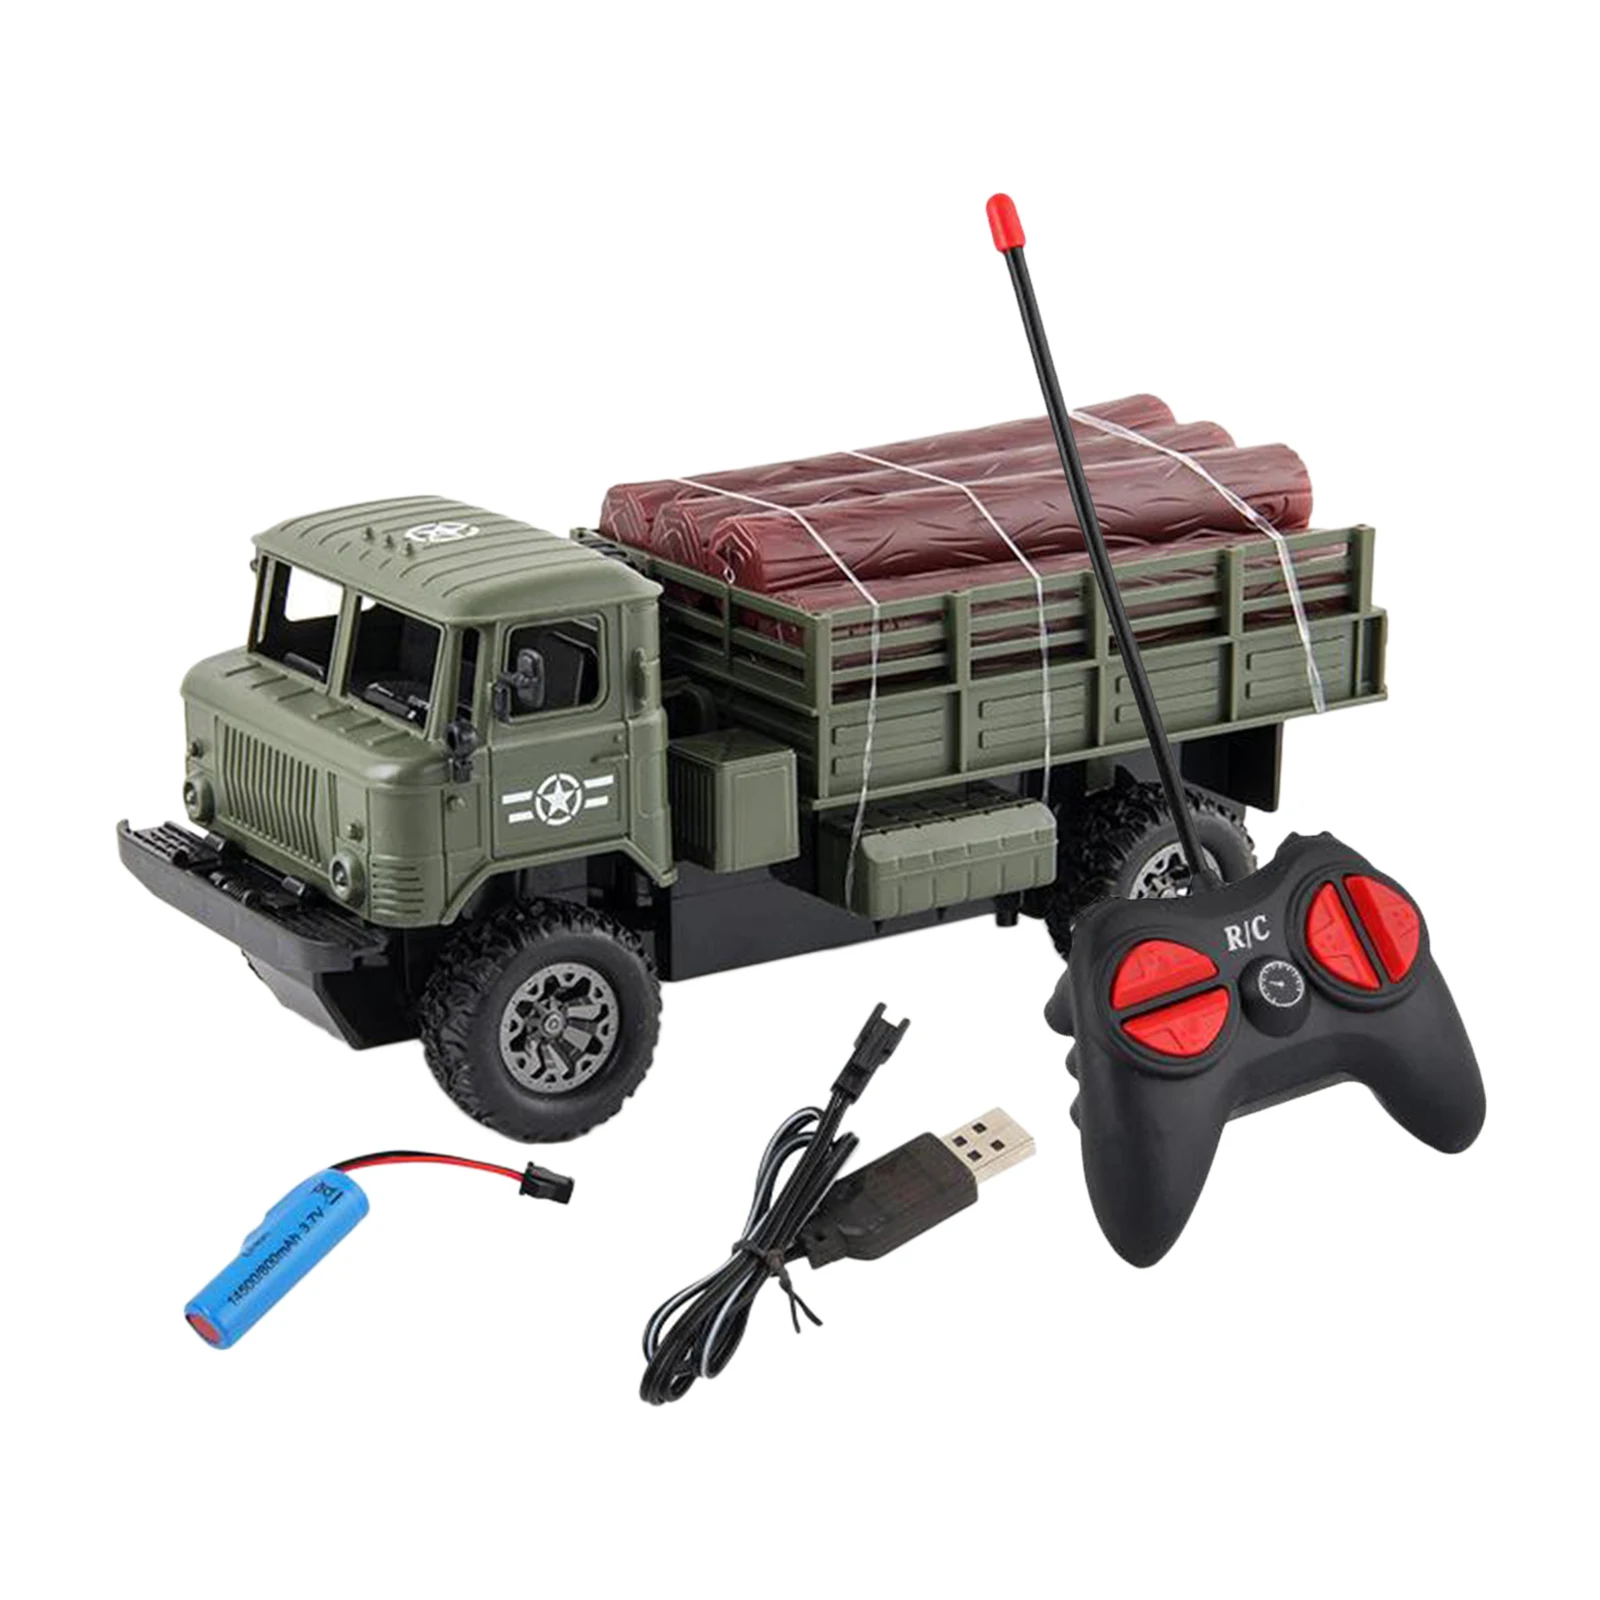 4CH Electric RC Construction Truck 1:20 Scale Radio Remote Control 4WD Crawler Engineering Vehicle Toys